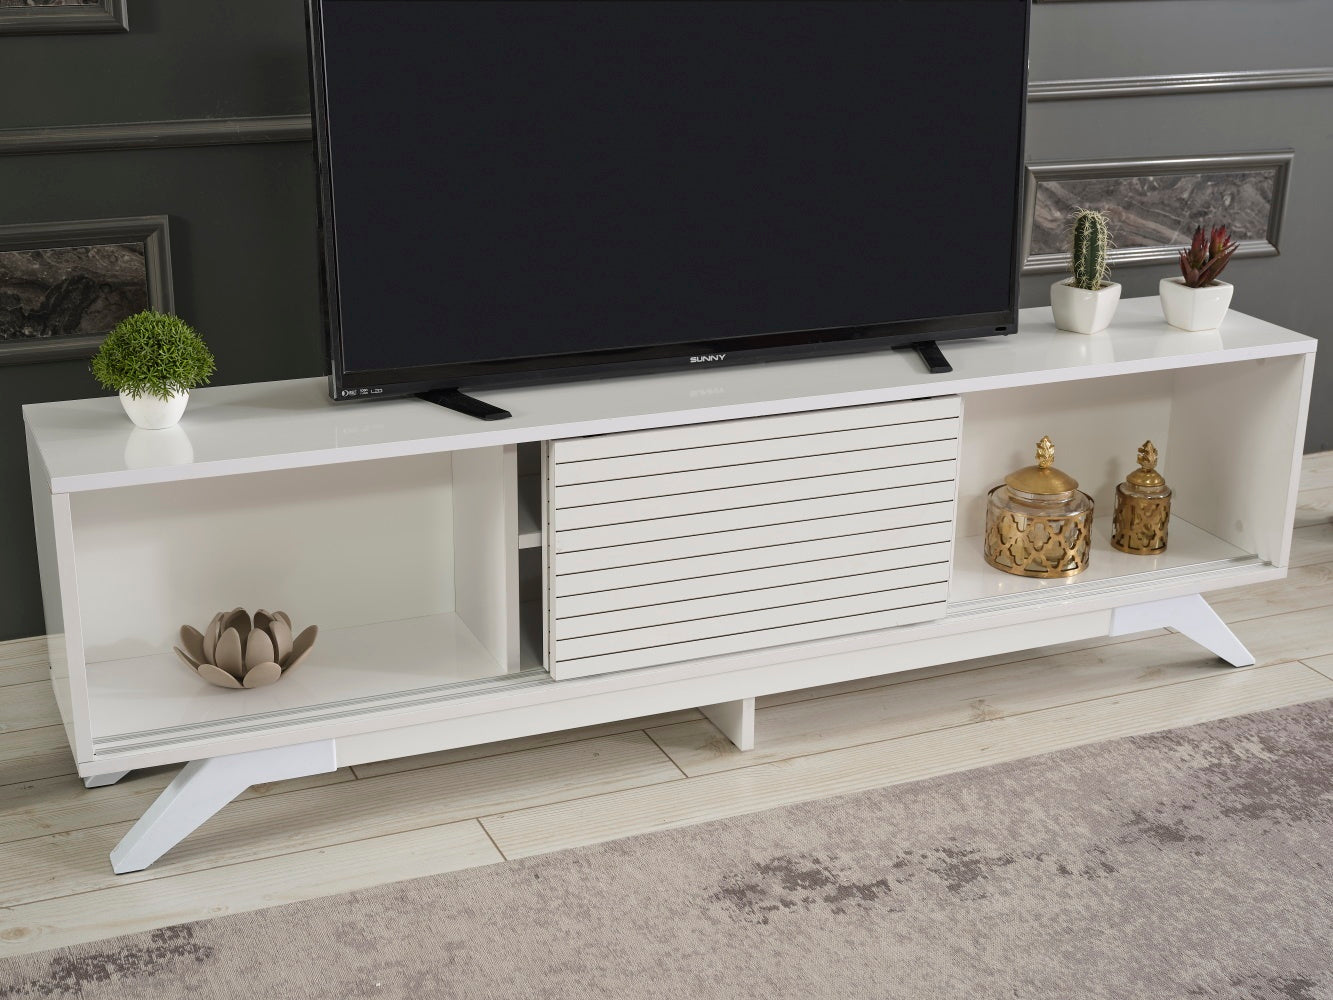 FurnisHome Store Luxia Mid Century Modern Tv Stand 2 Sliding Door Cabinet 2 Shelves 67 inch Tv Uni, White